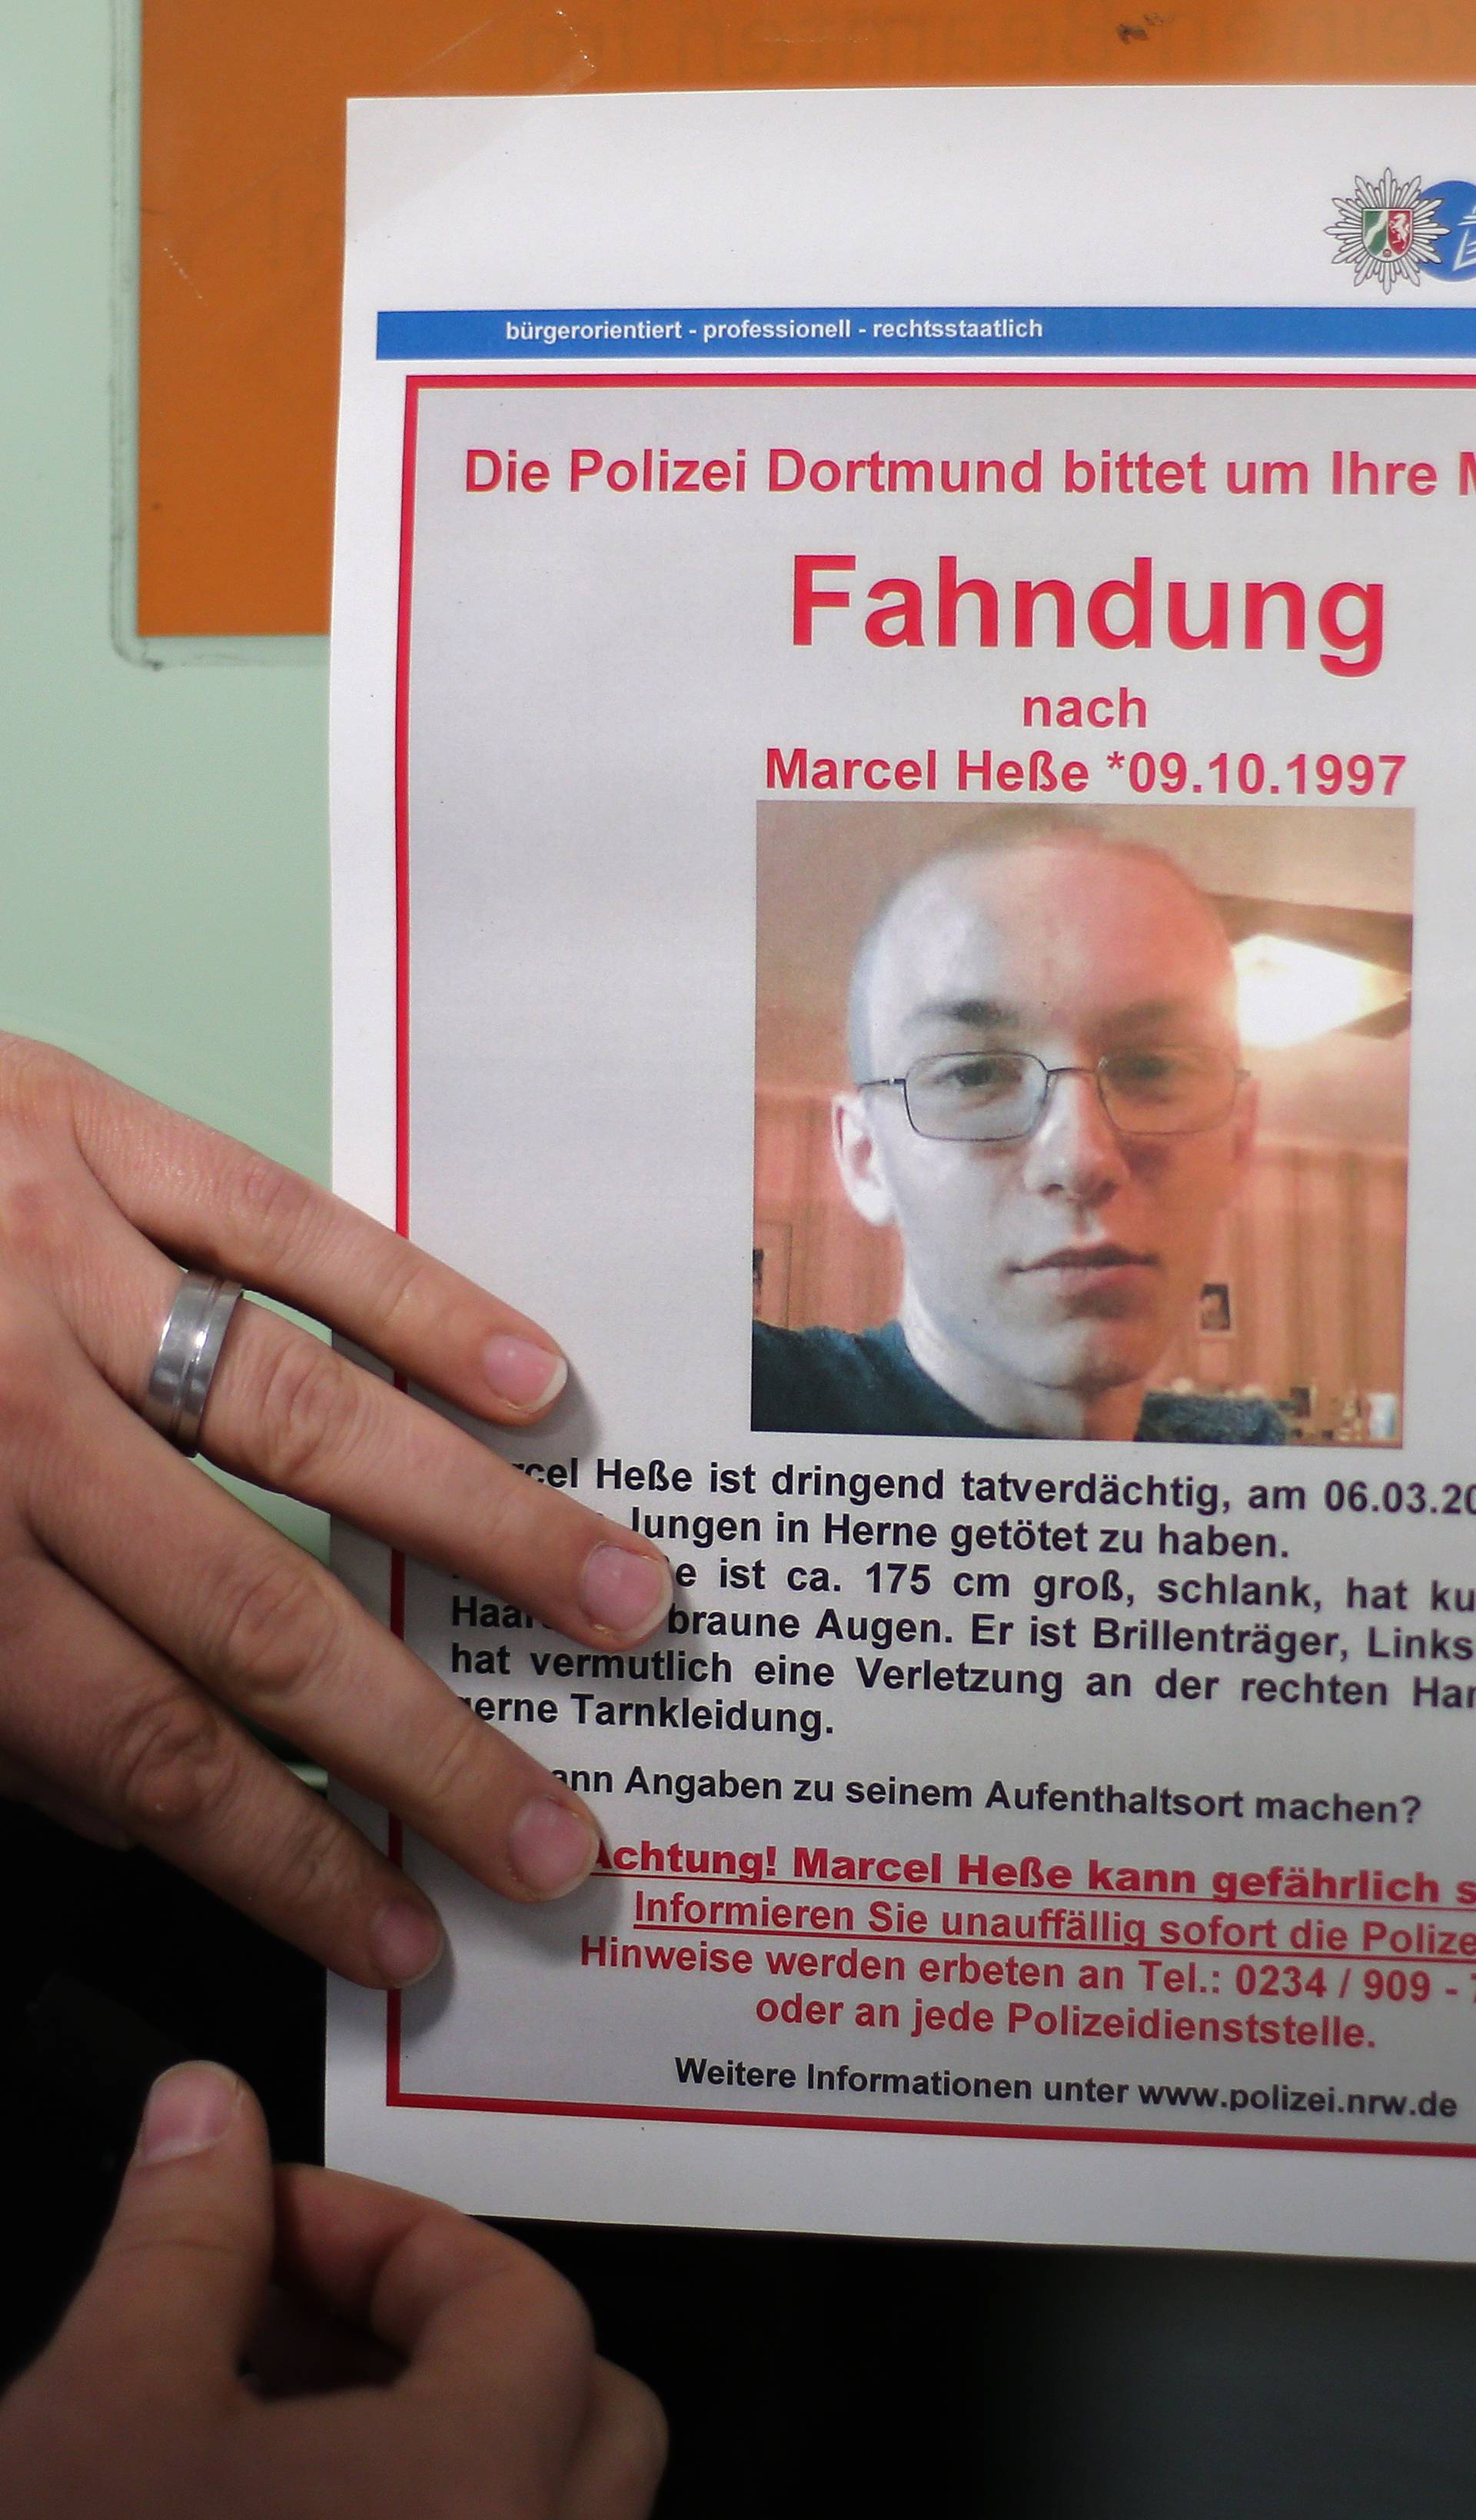 Nine-year-old dead, perpetrator on the run in Herne, Germany